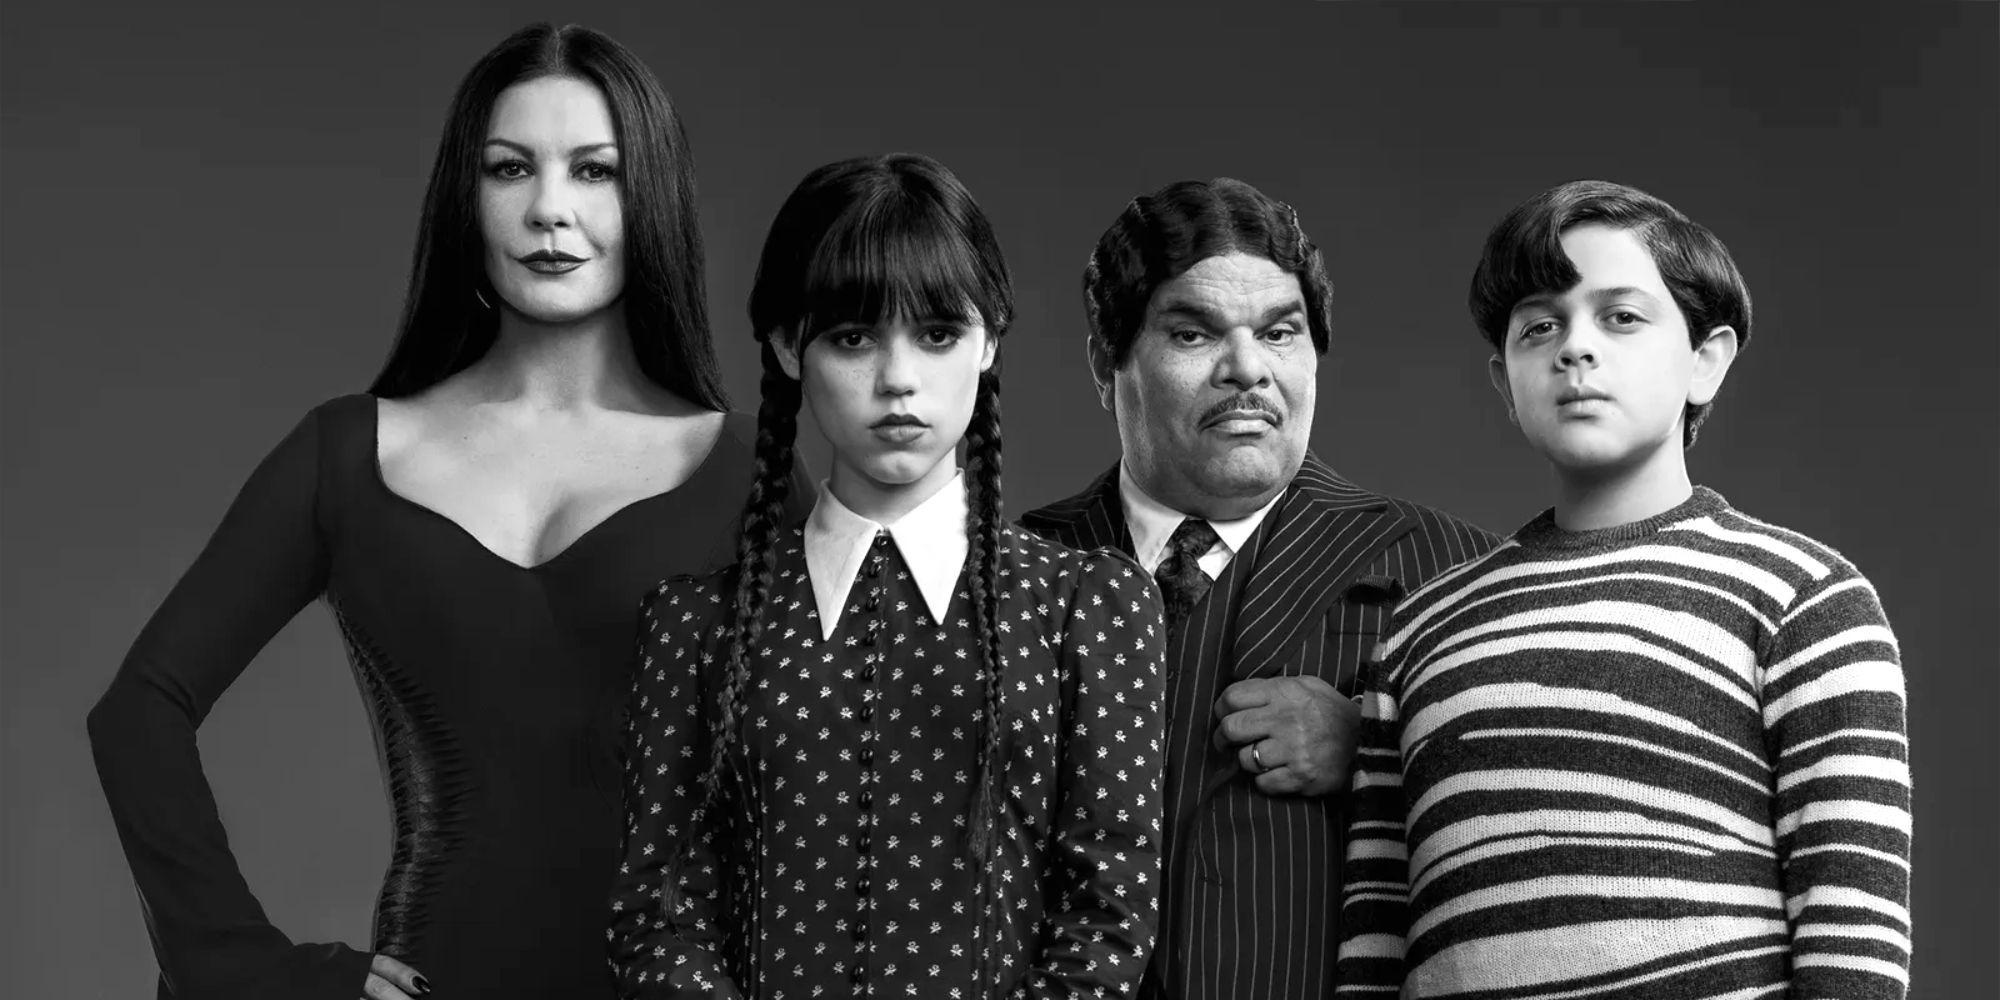 The Addams Family Wednesday cast, Morticia, Wednesday, Gomez, and Pugsley